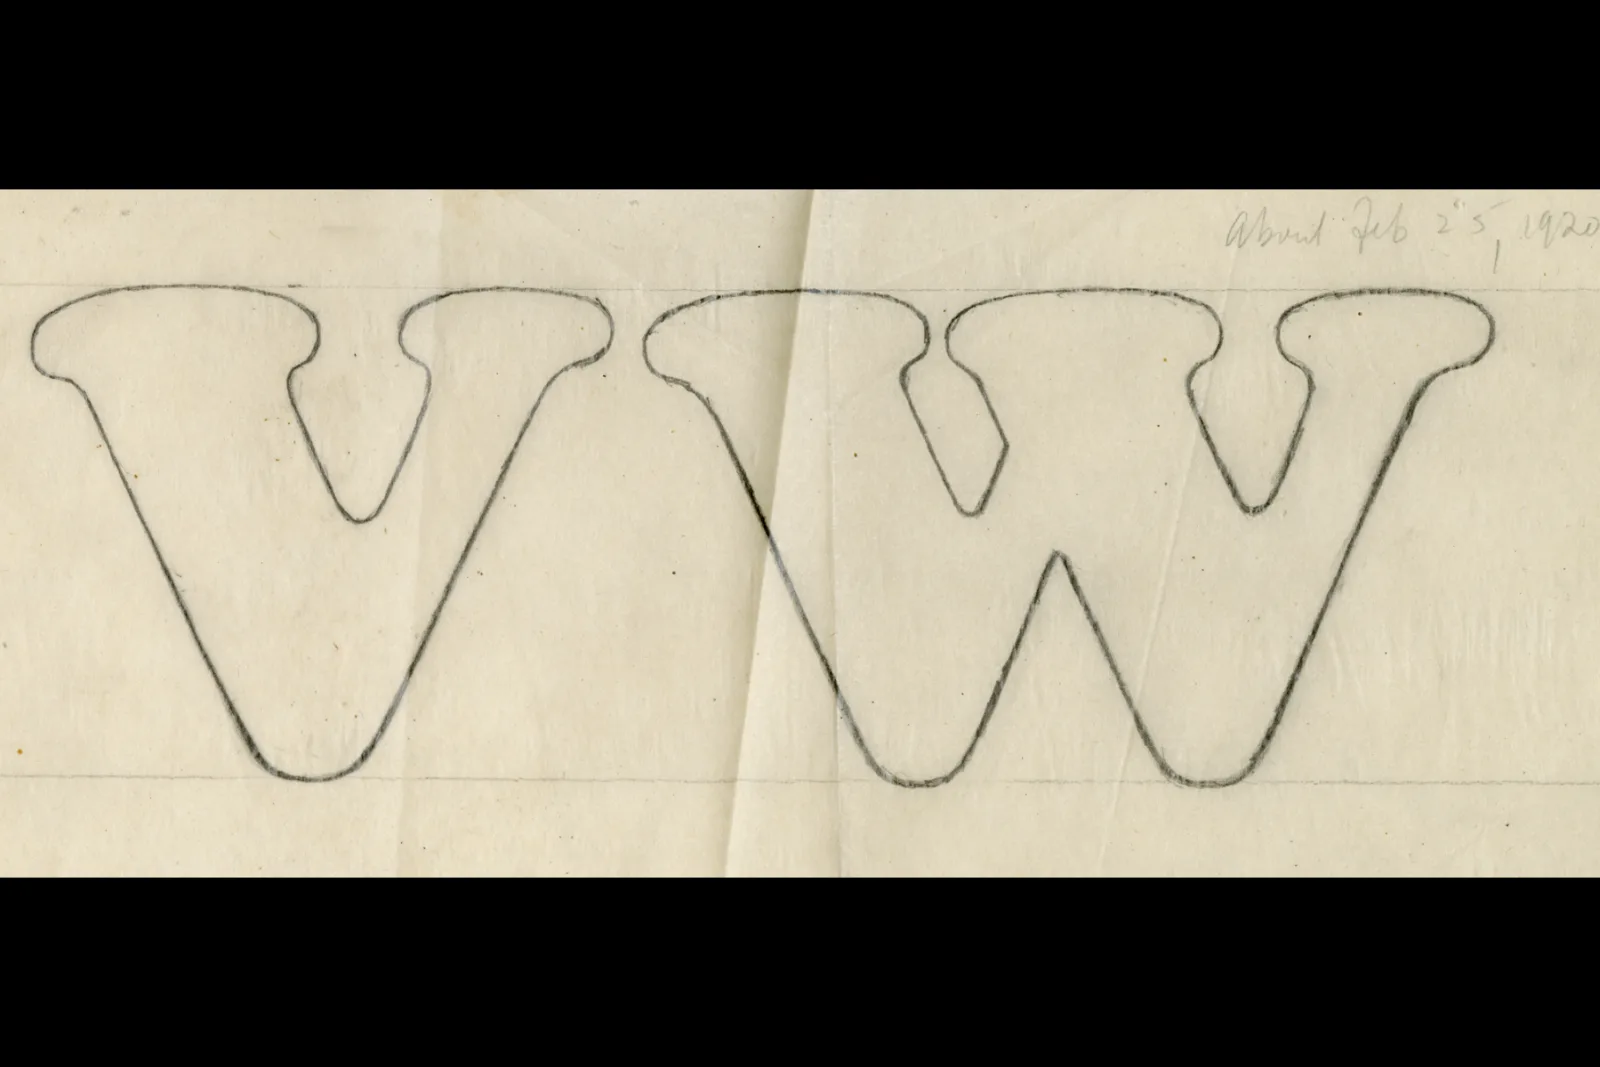 Sketches for the letters "V" and "W."